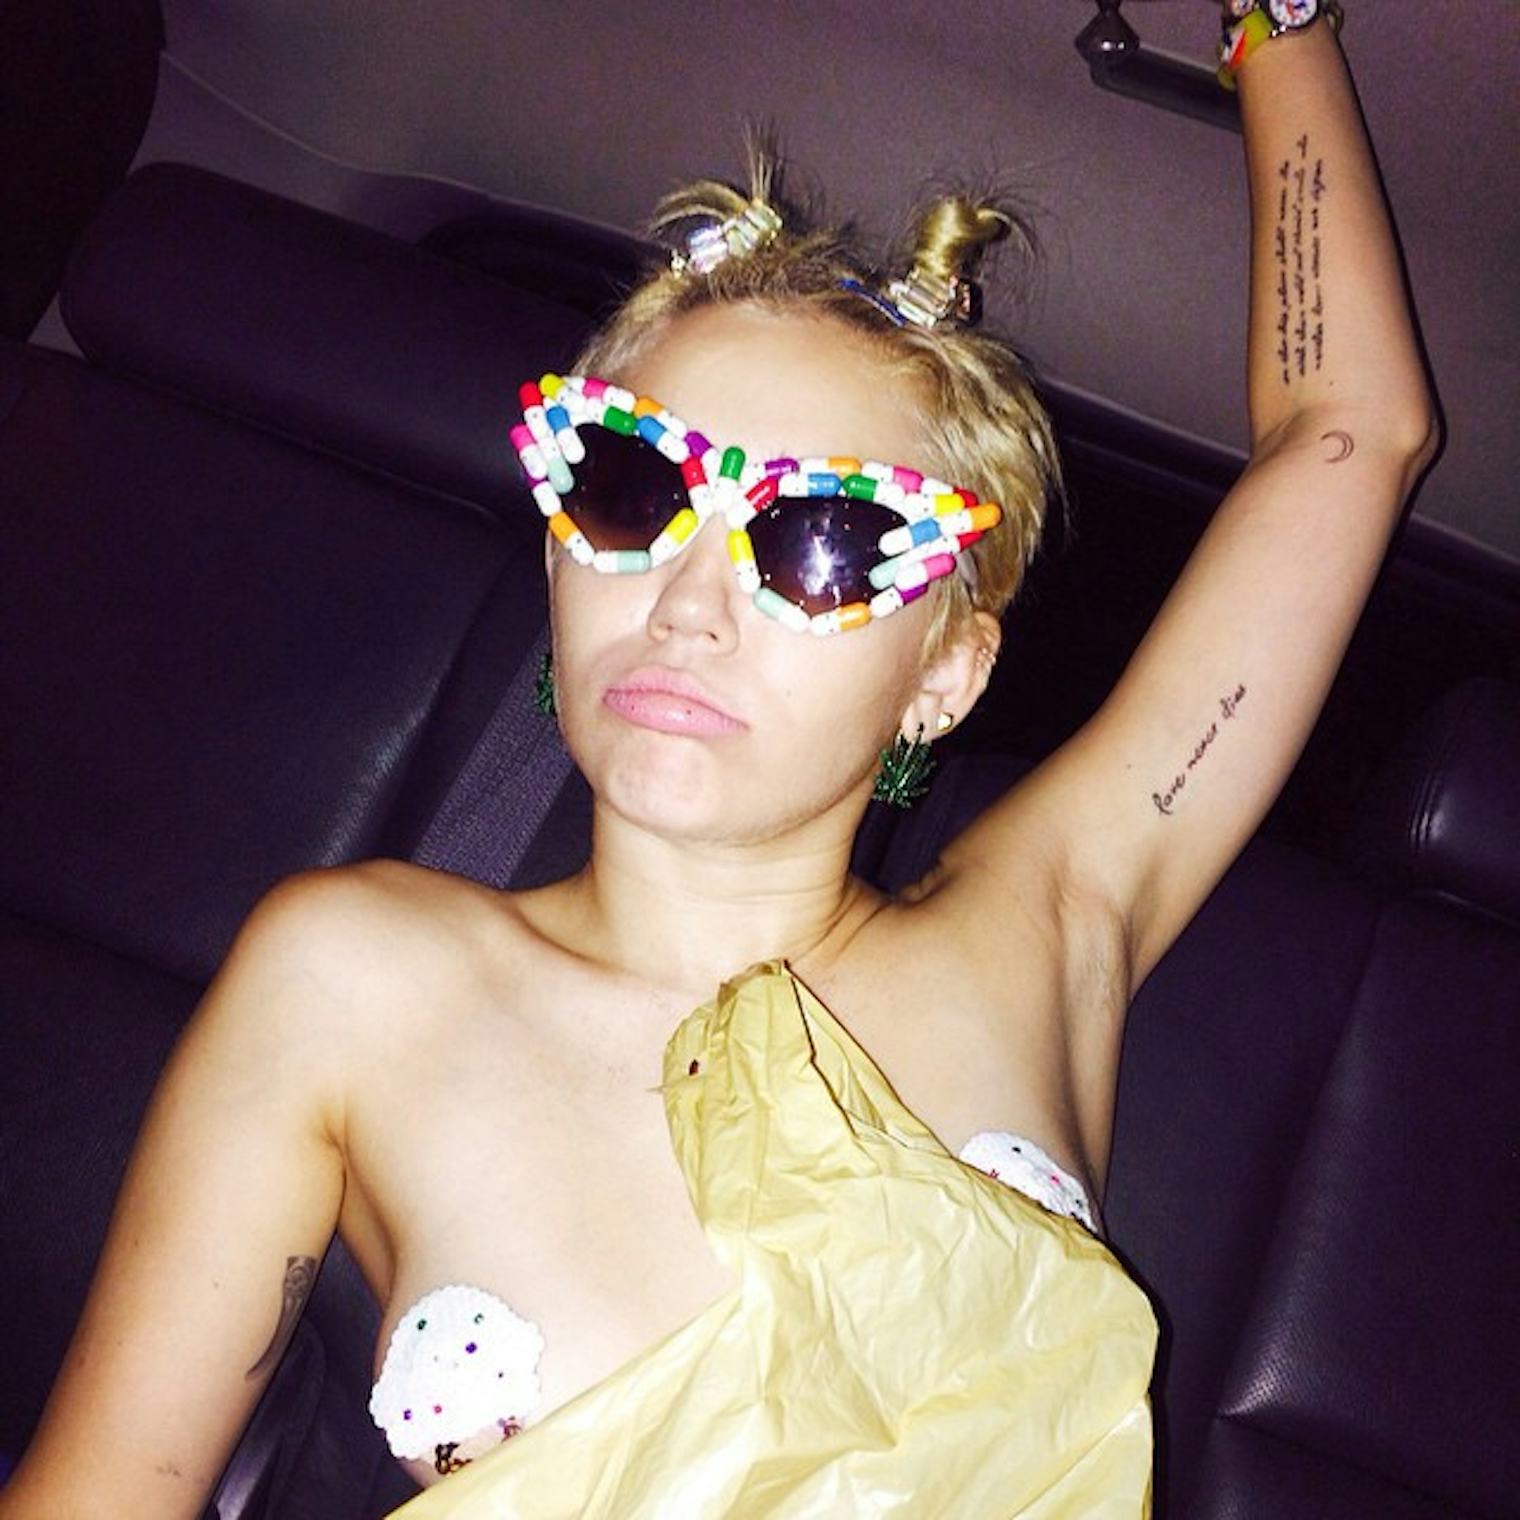 Miley Cyrus Wears Pasties And Takes Fashion Week To New Risque Heights